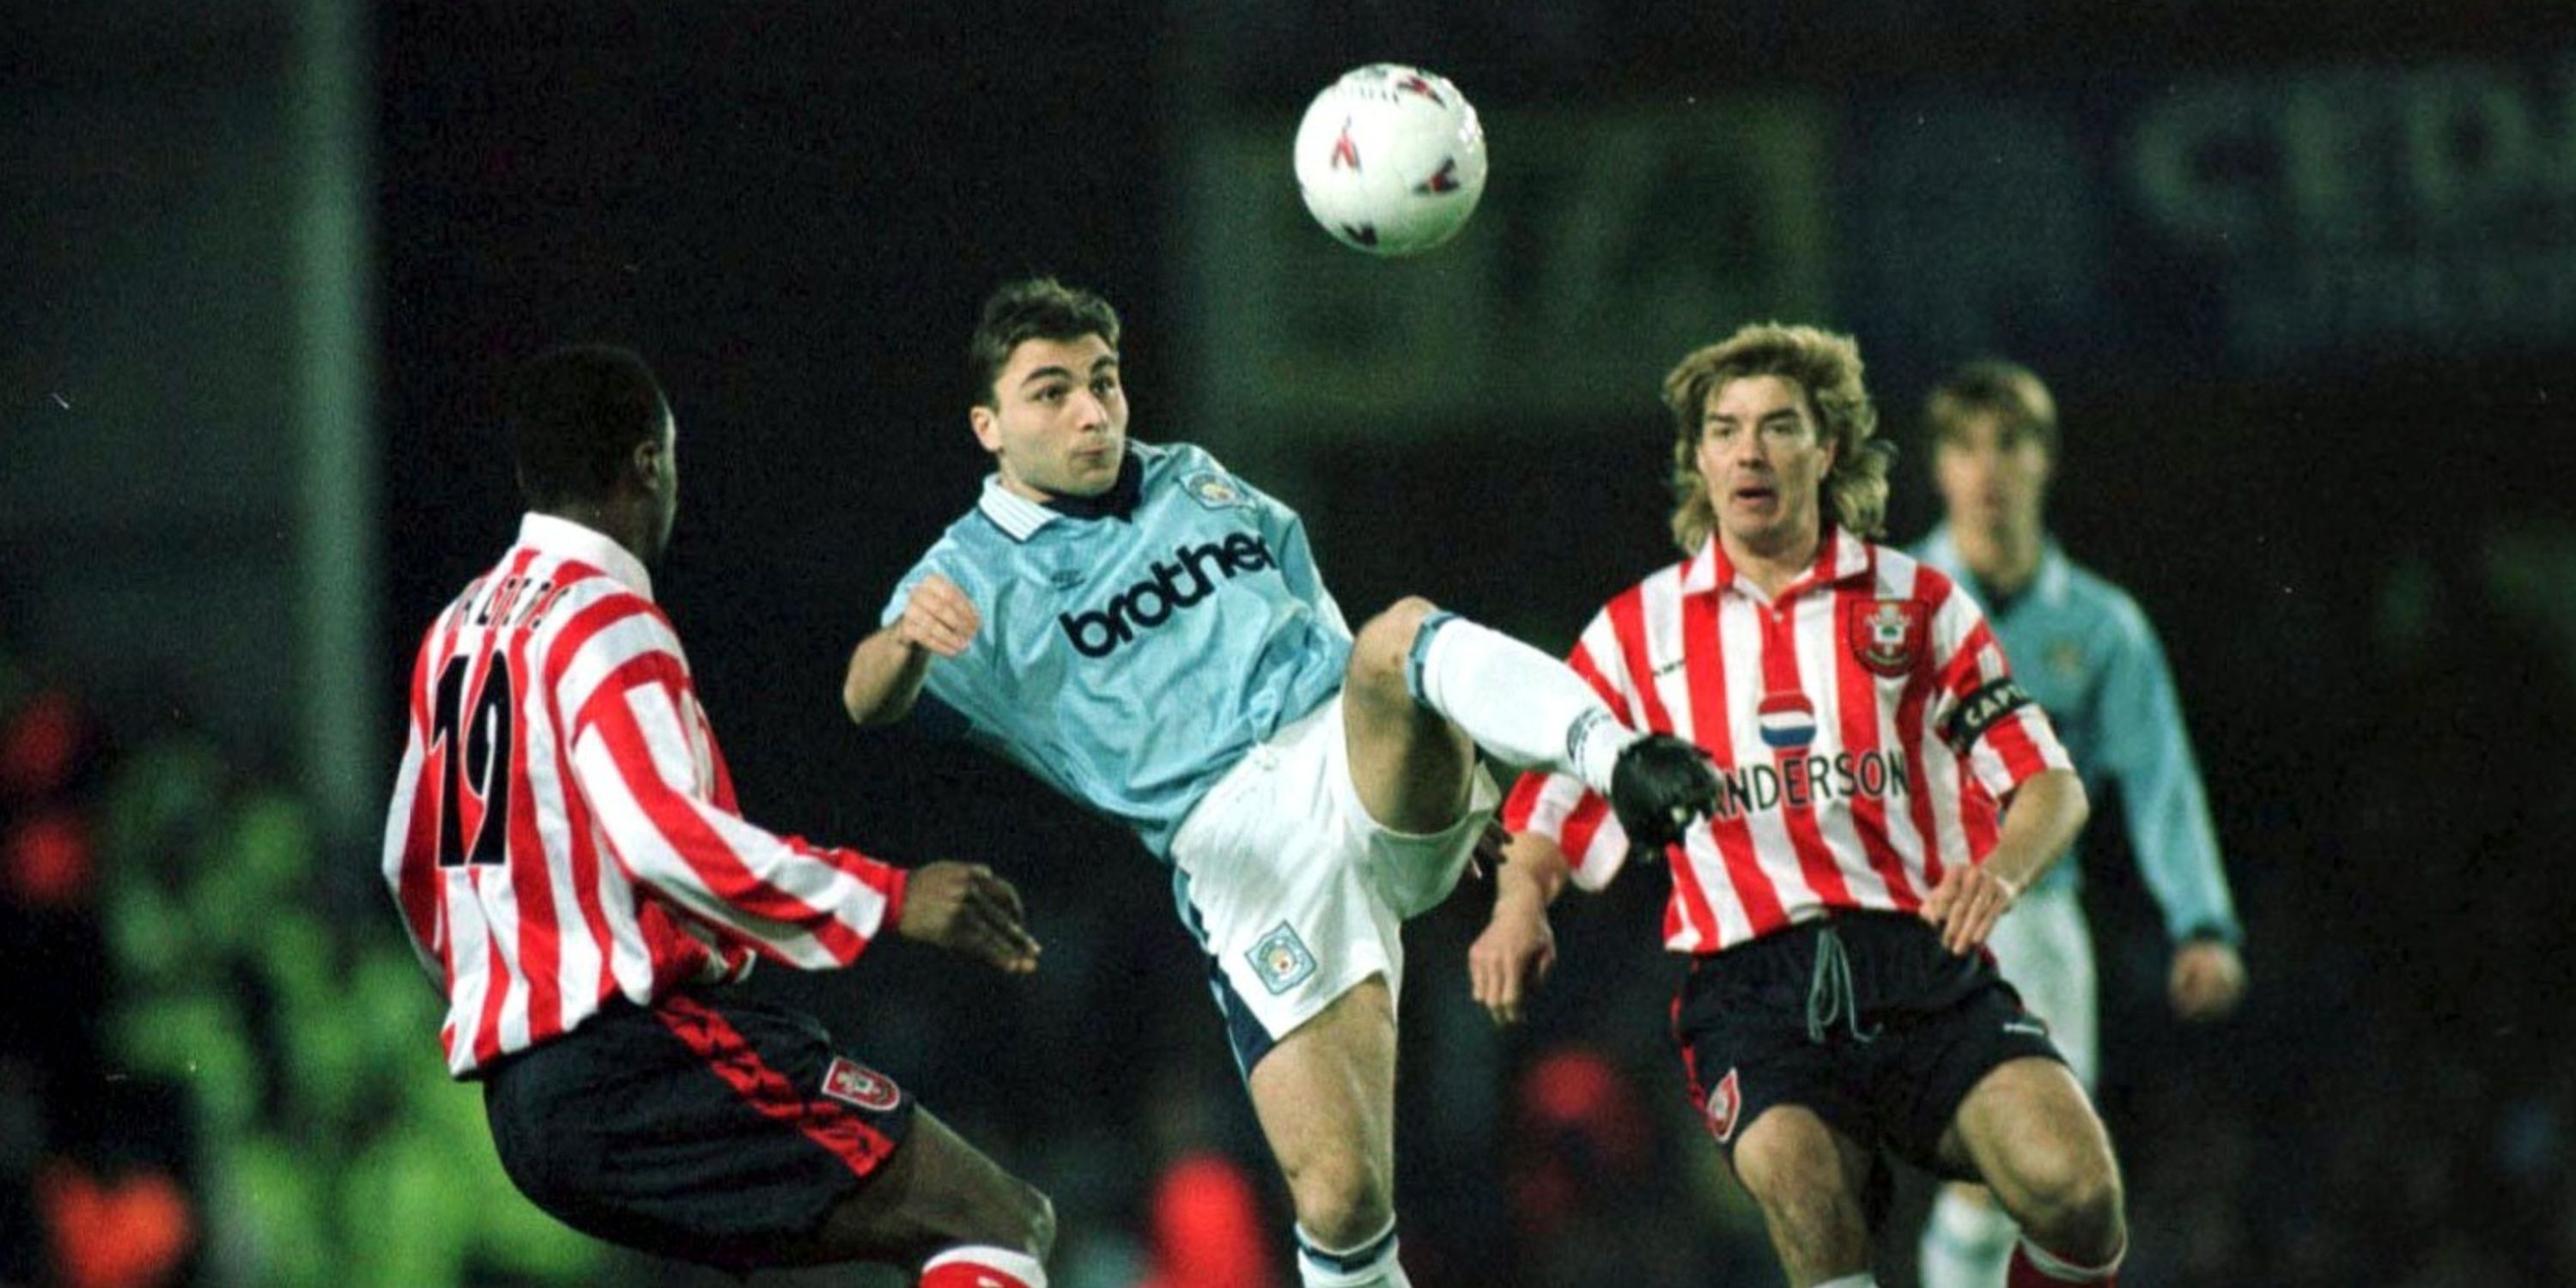 Manchester City's Georgi Kinkladze controls the ball in the air, surrounded by Southampton players.